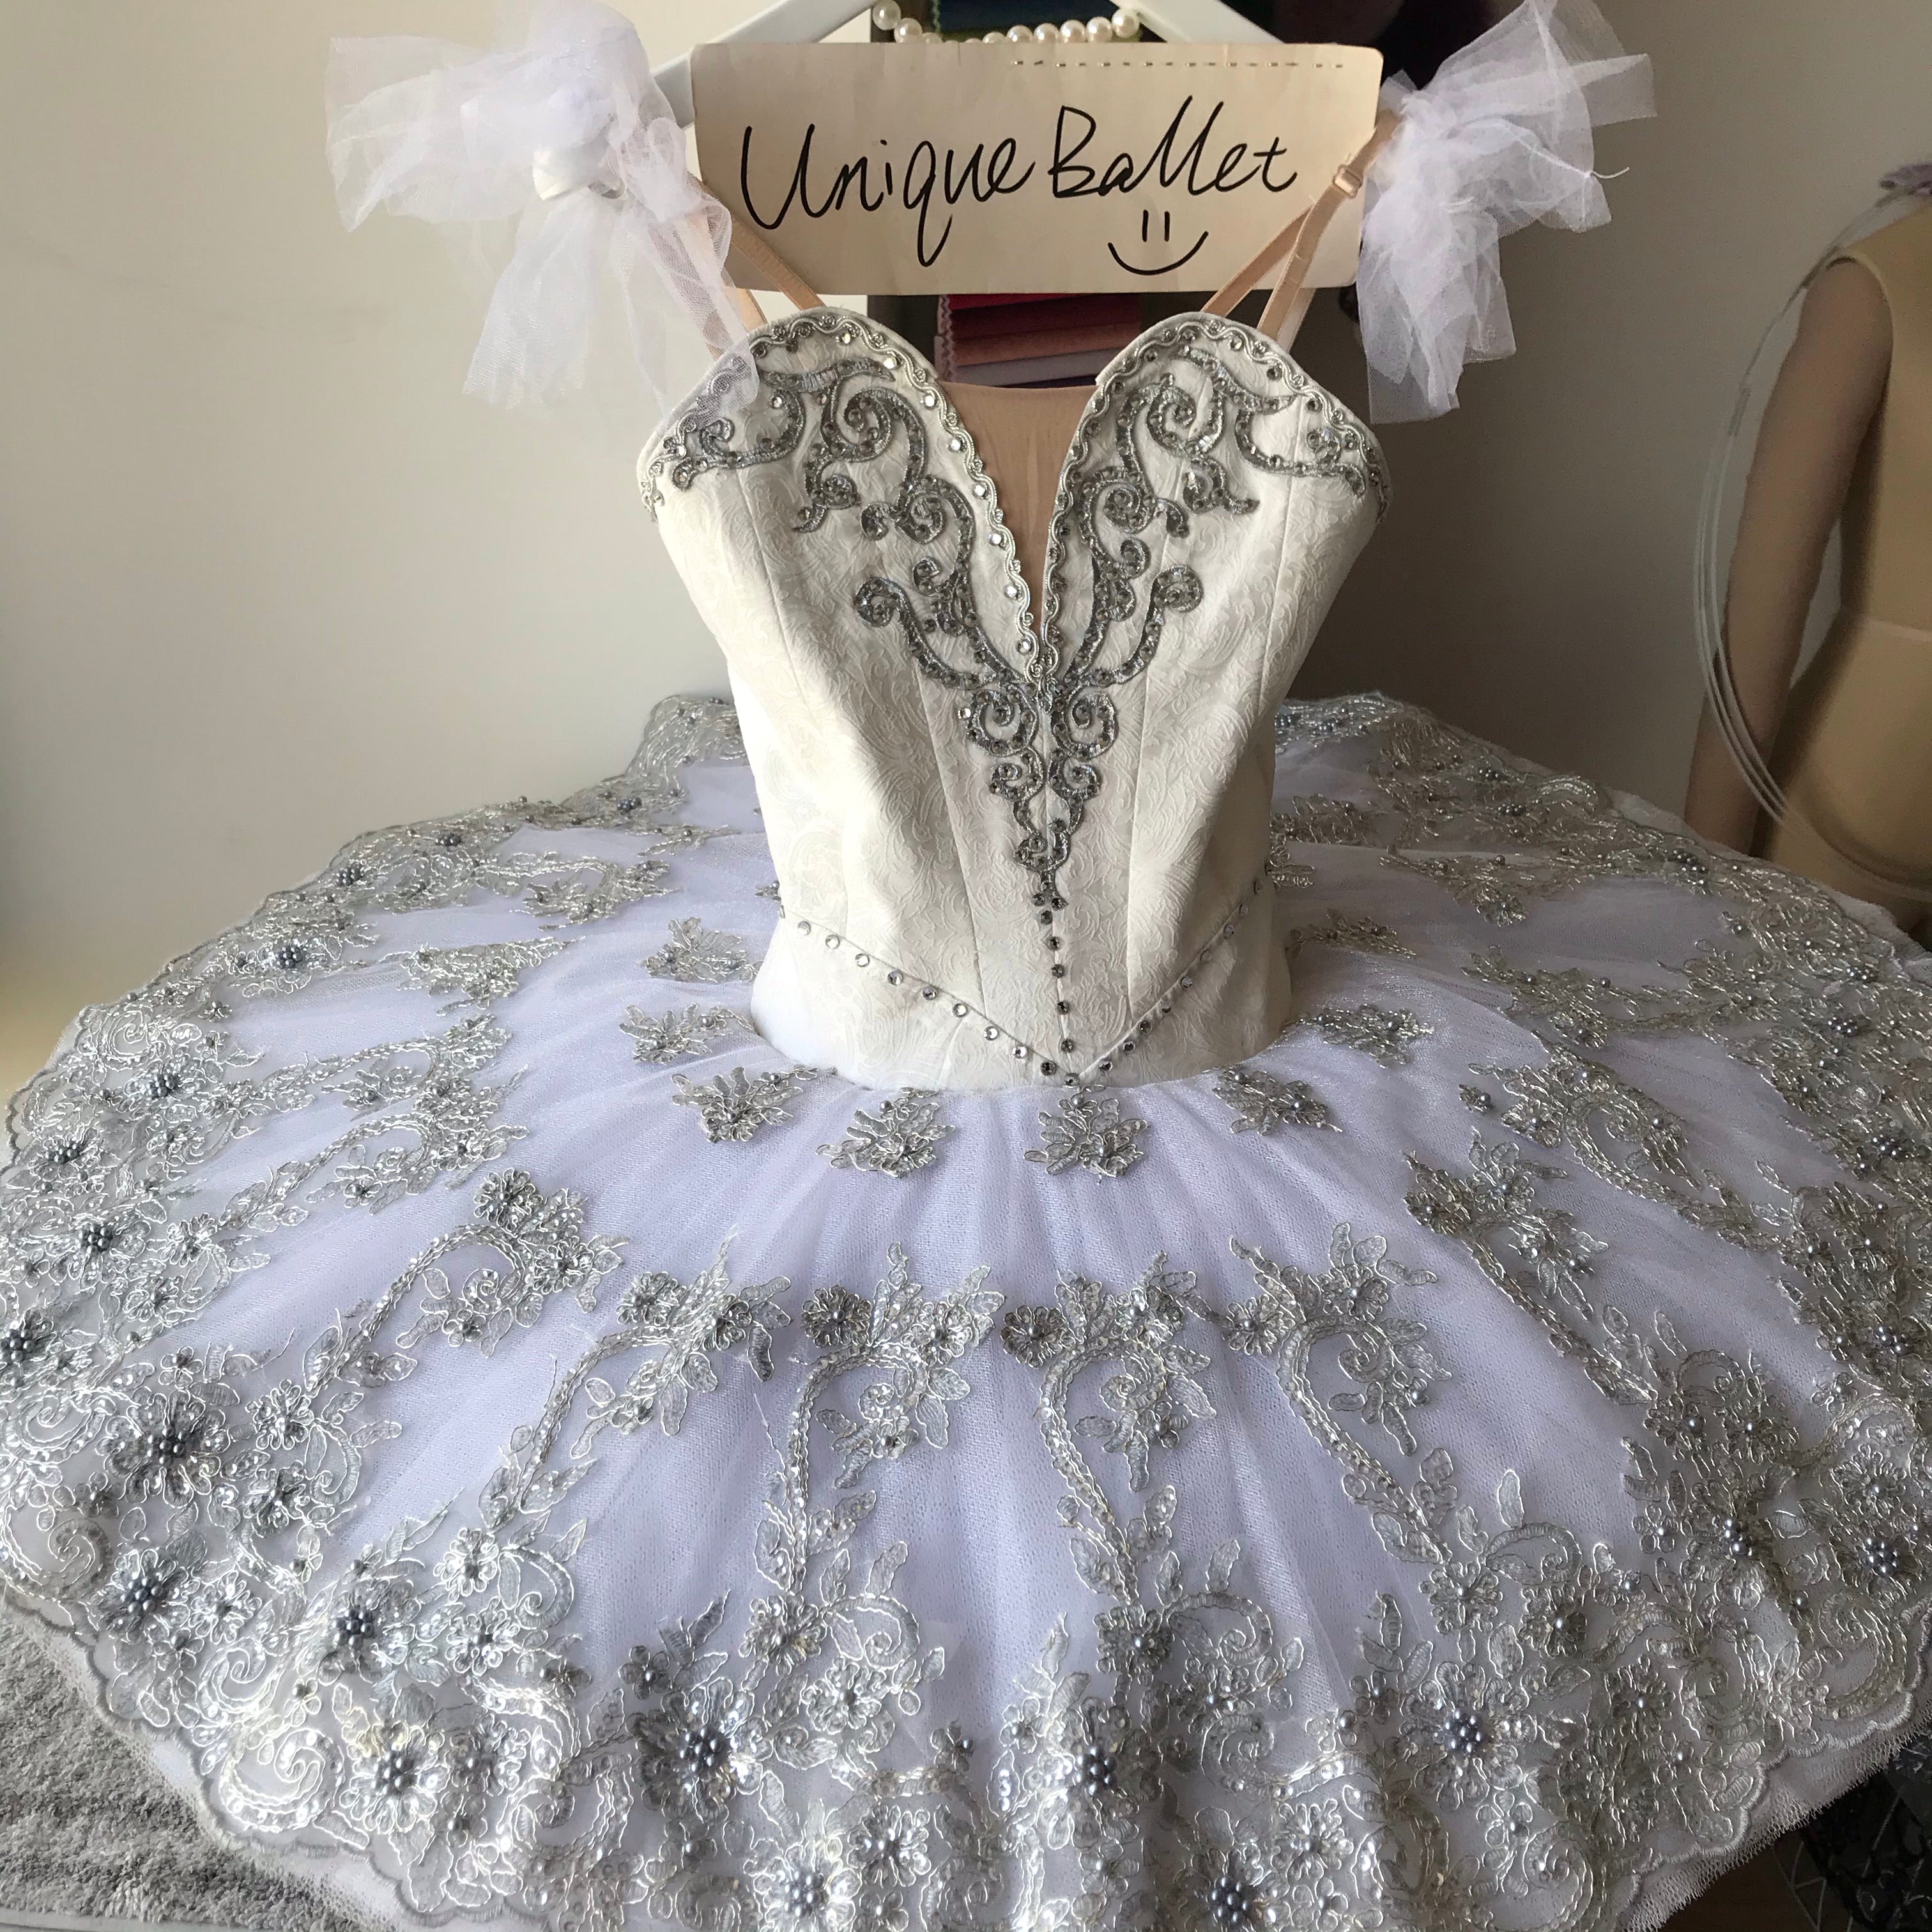 Professional White Sleeping Beauty Princess Aurora The Vision Wedding Classical Ballet TuTu Costume With Hooks YAGP Stage Performance Dance wear